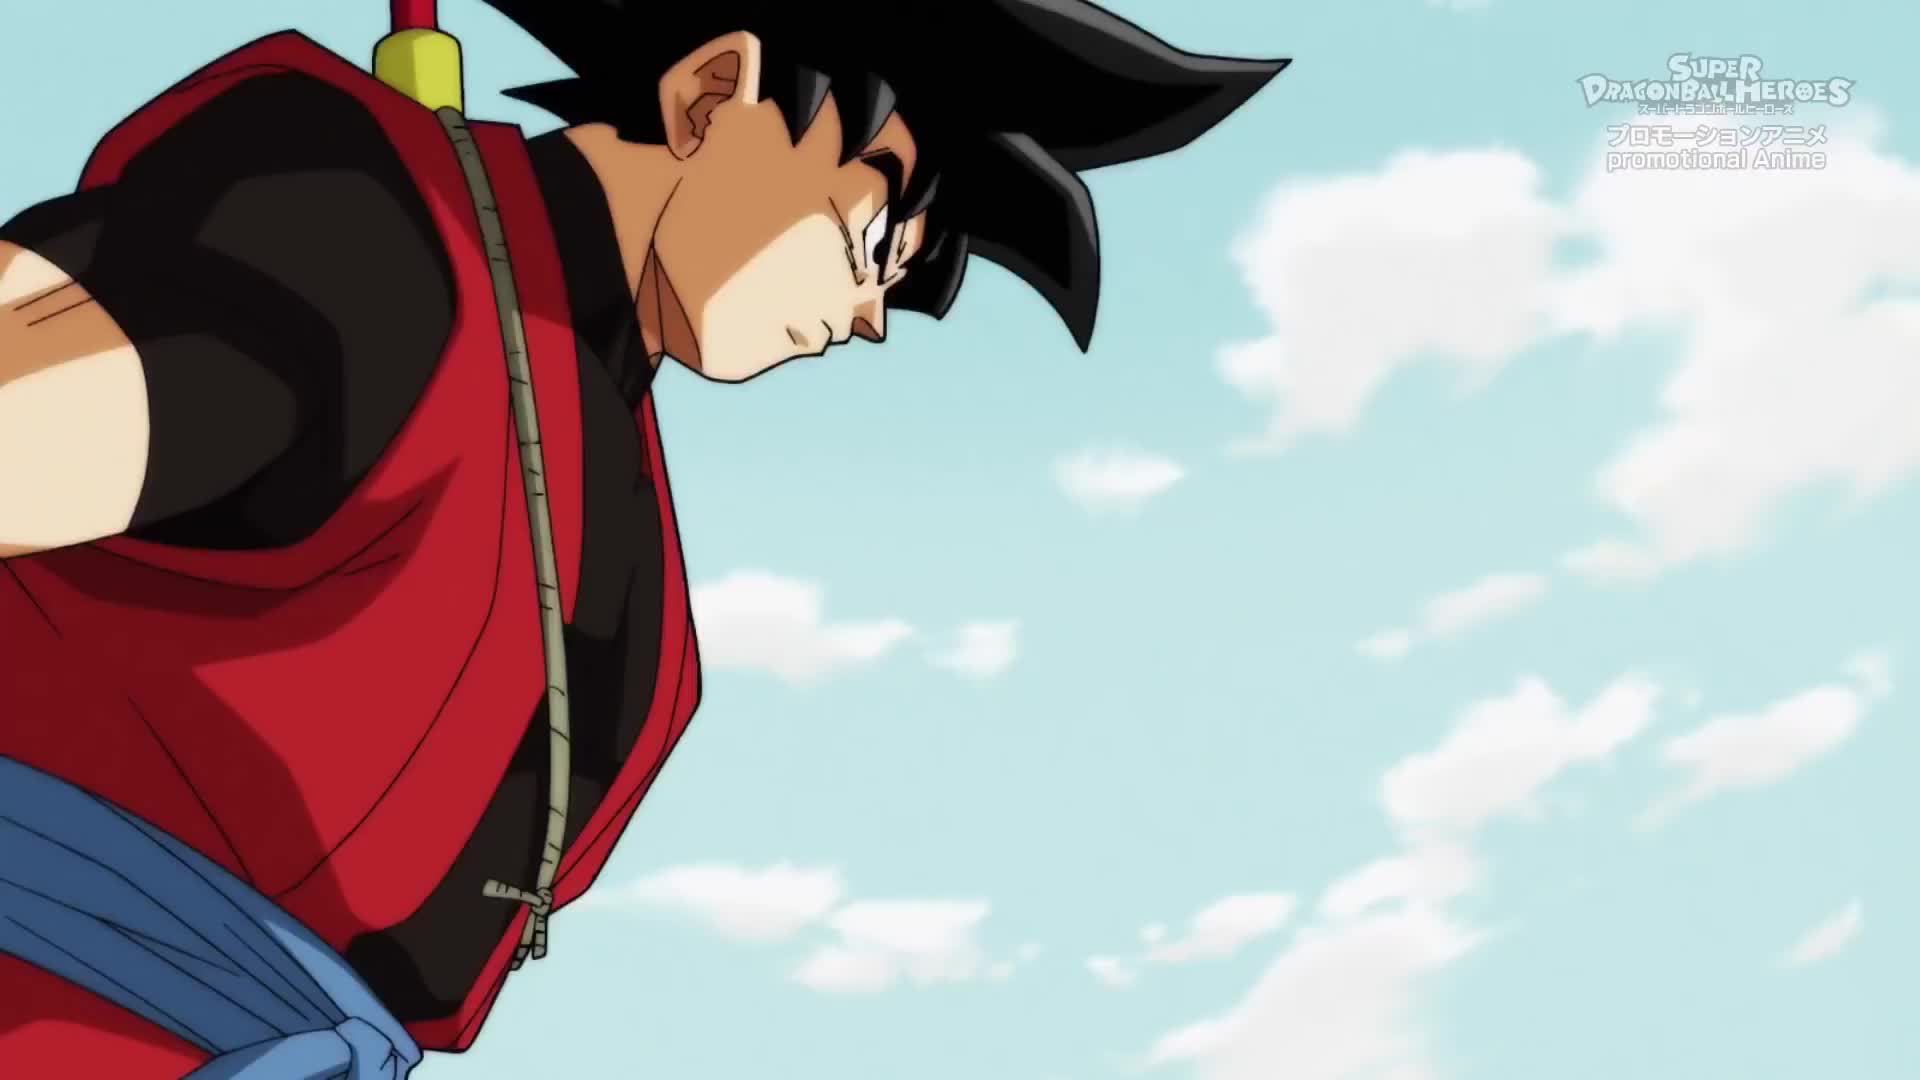 Super Dragon Ball Heroes Episode 1 English Sub 1080p GIF. Find